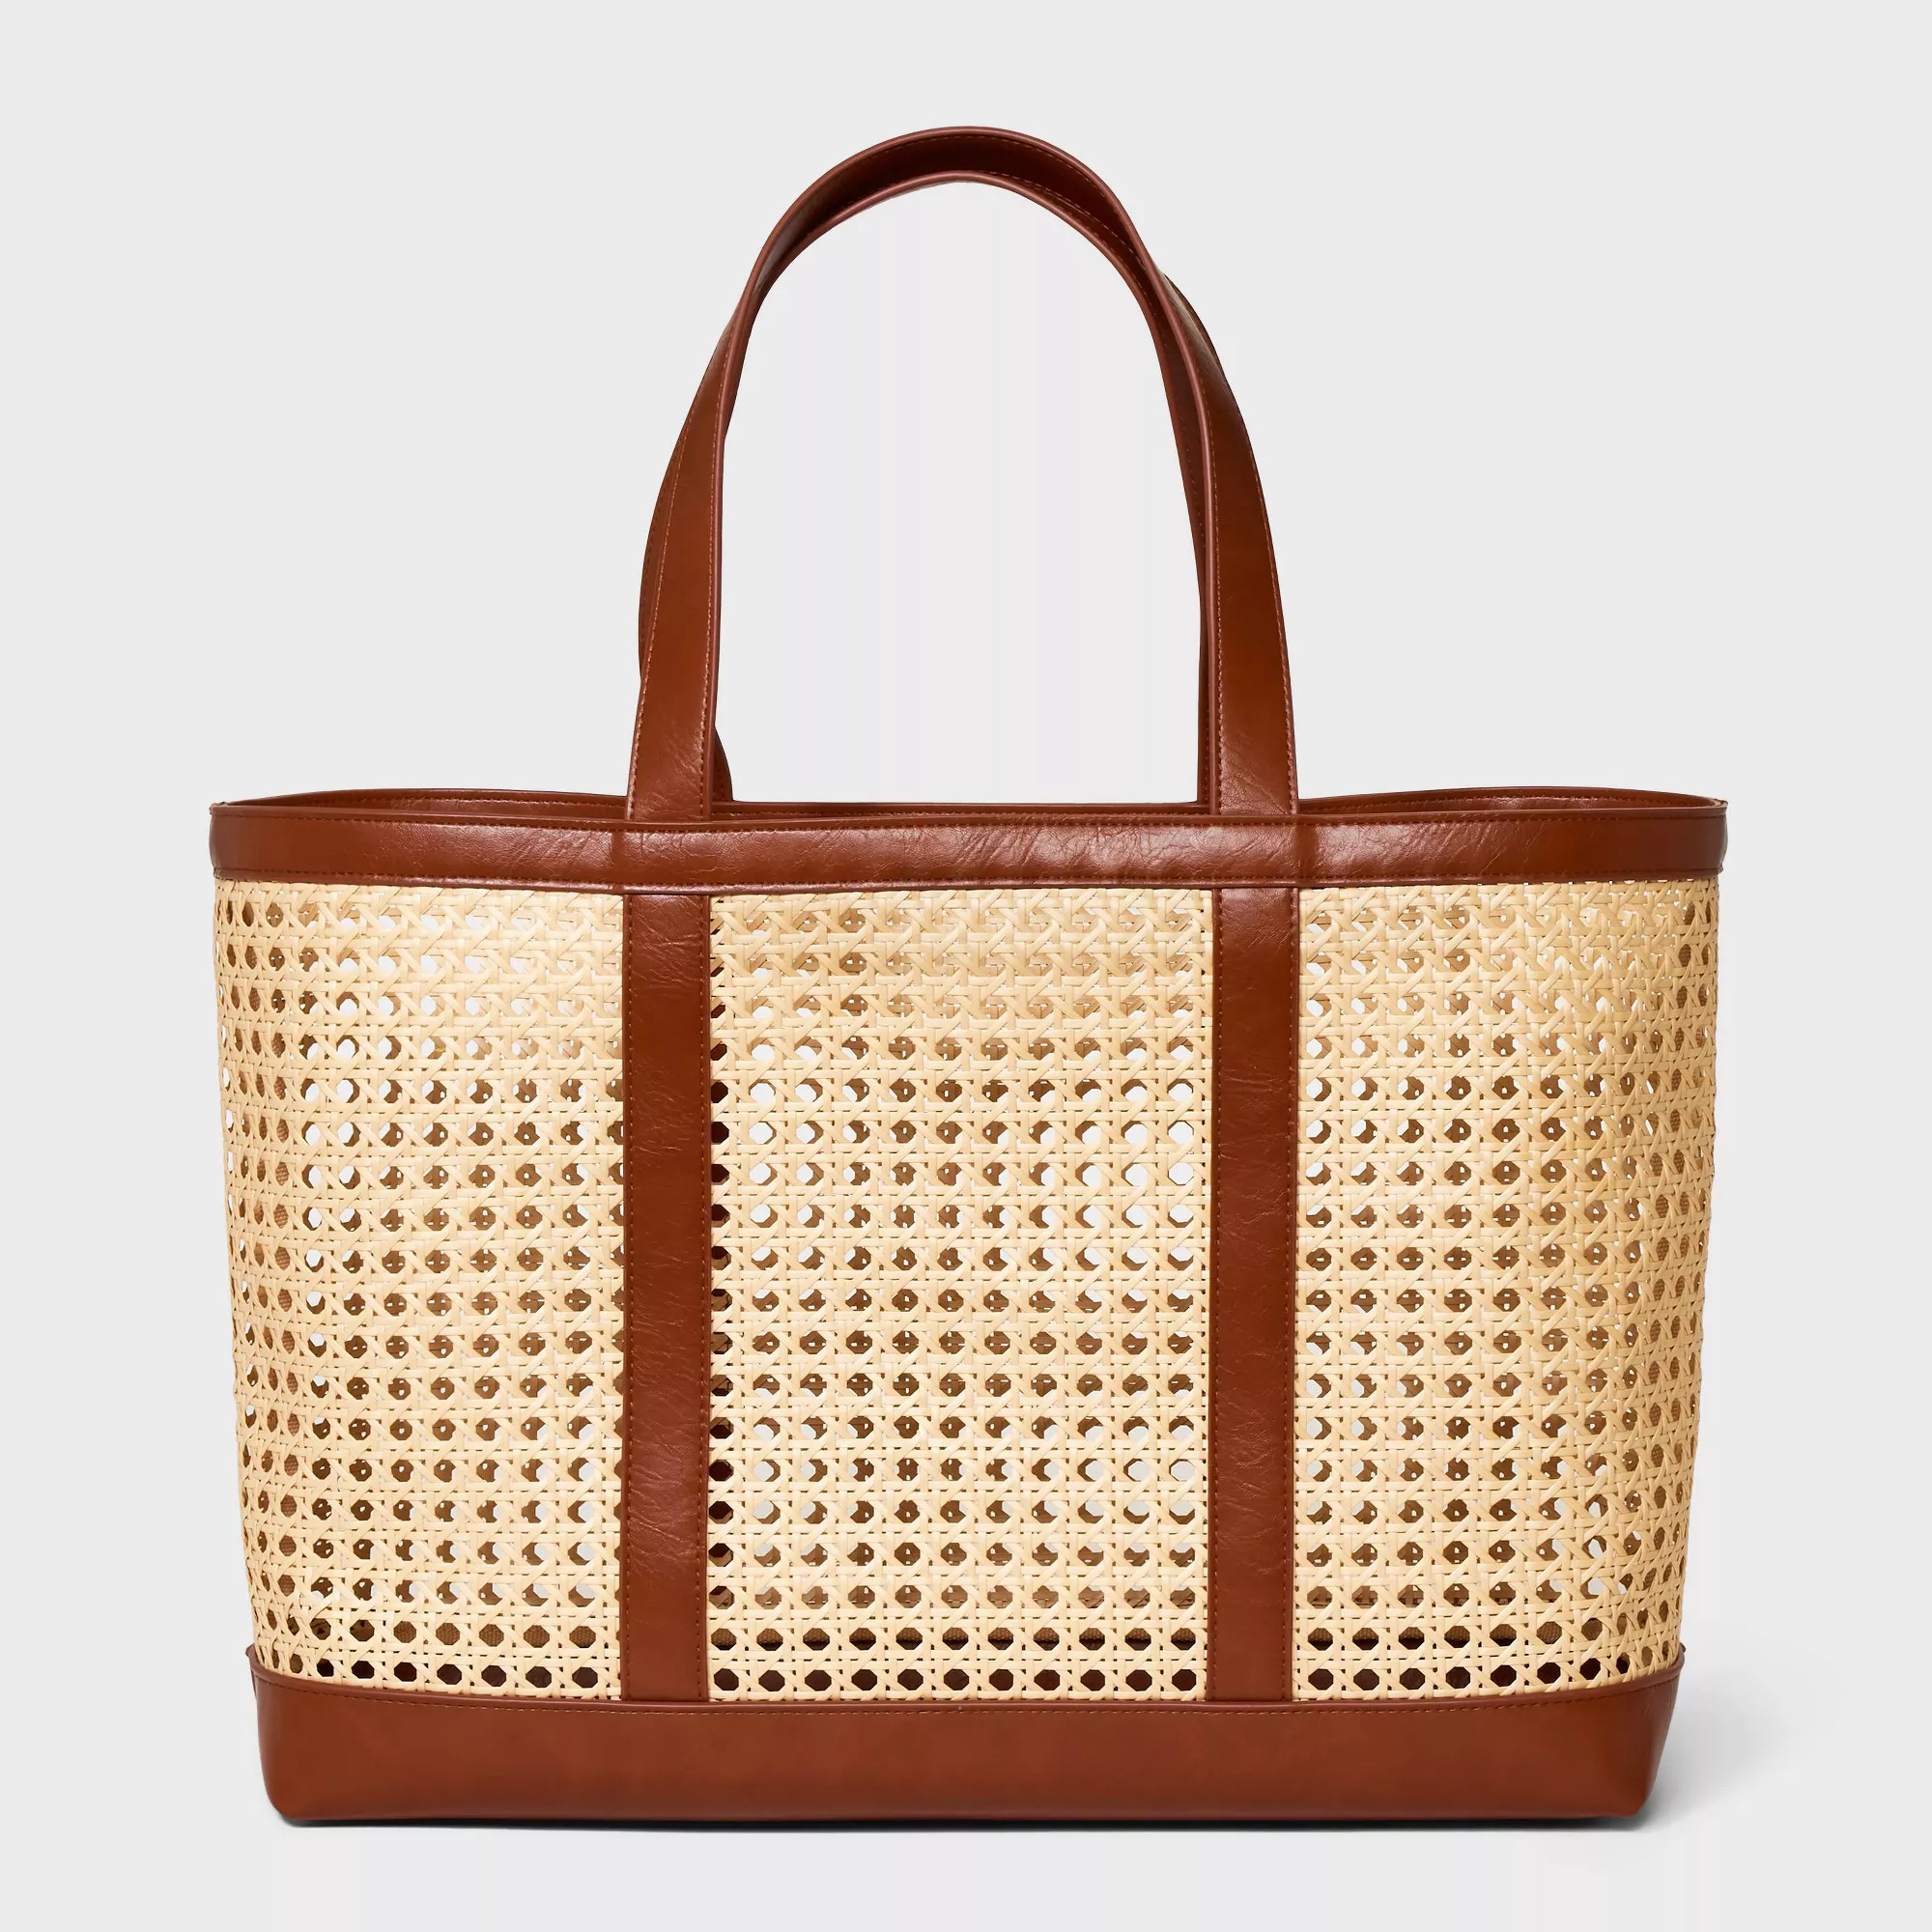 Leather-trimmed woven tote bag on a white background